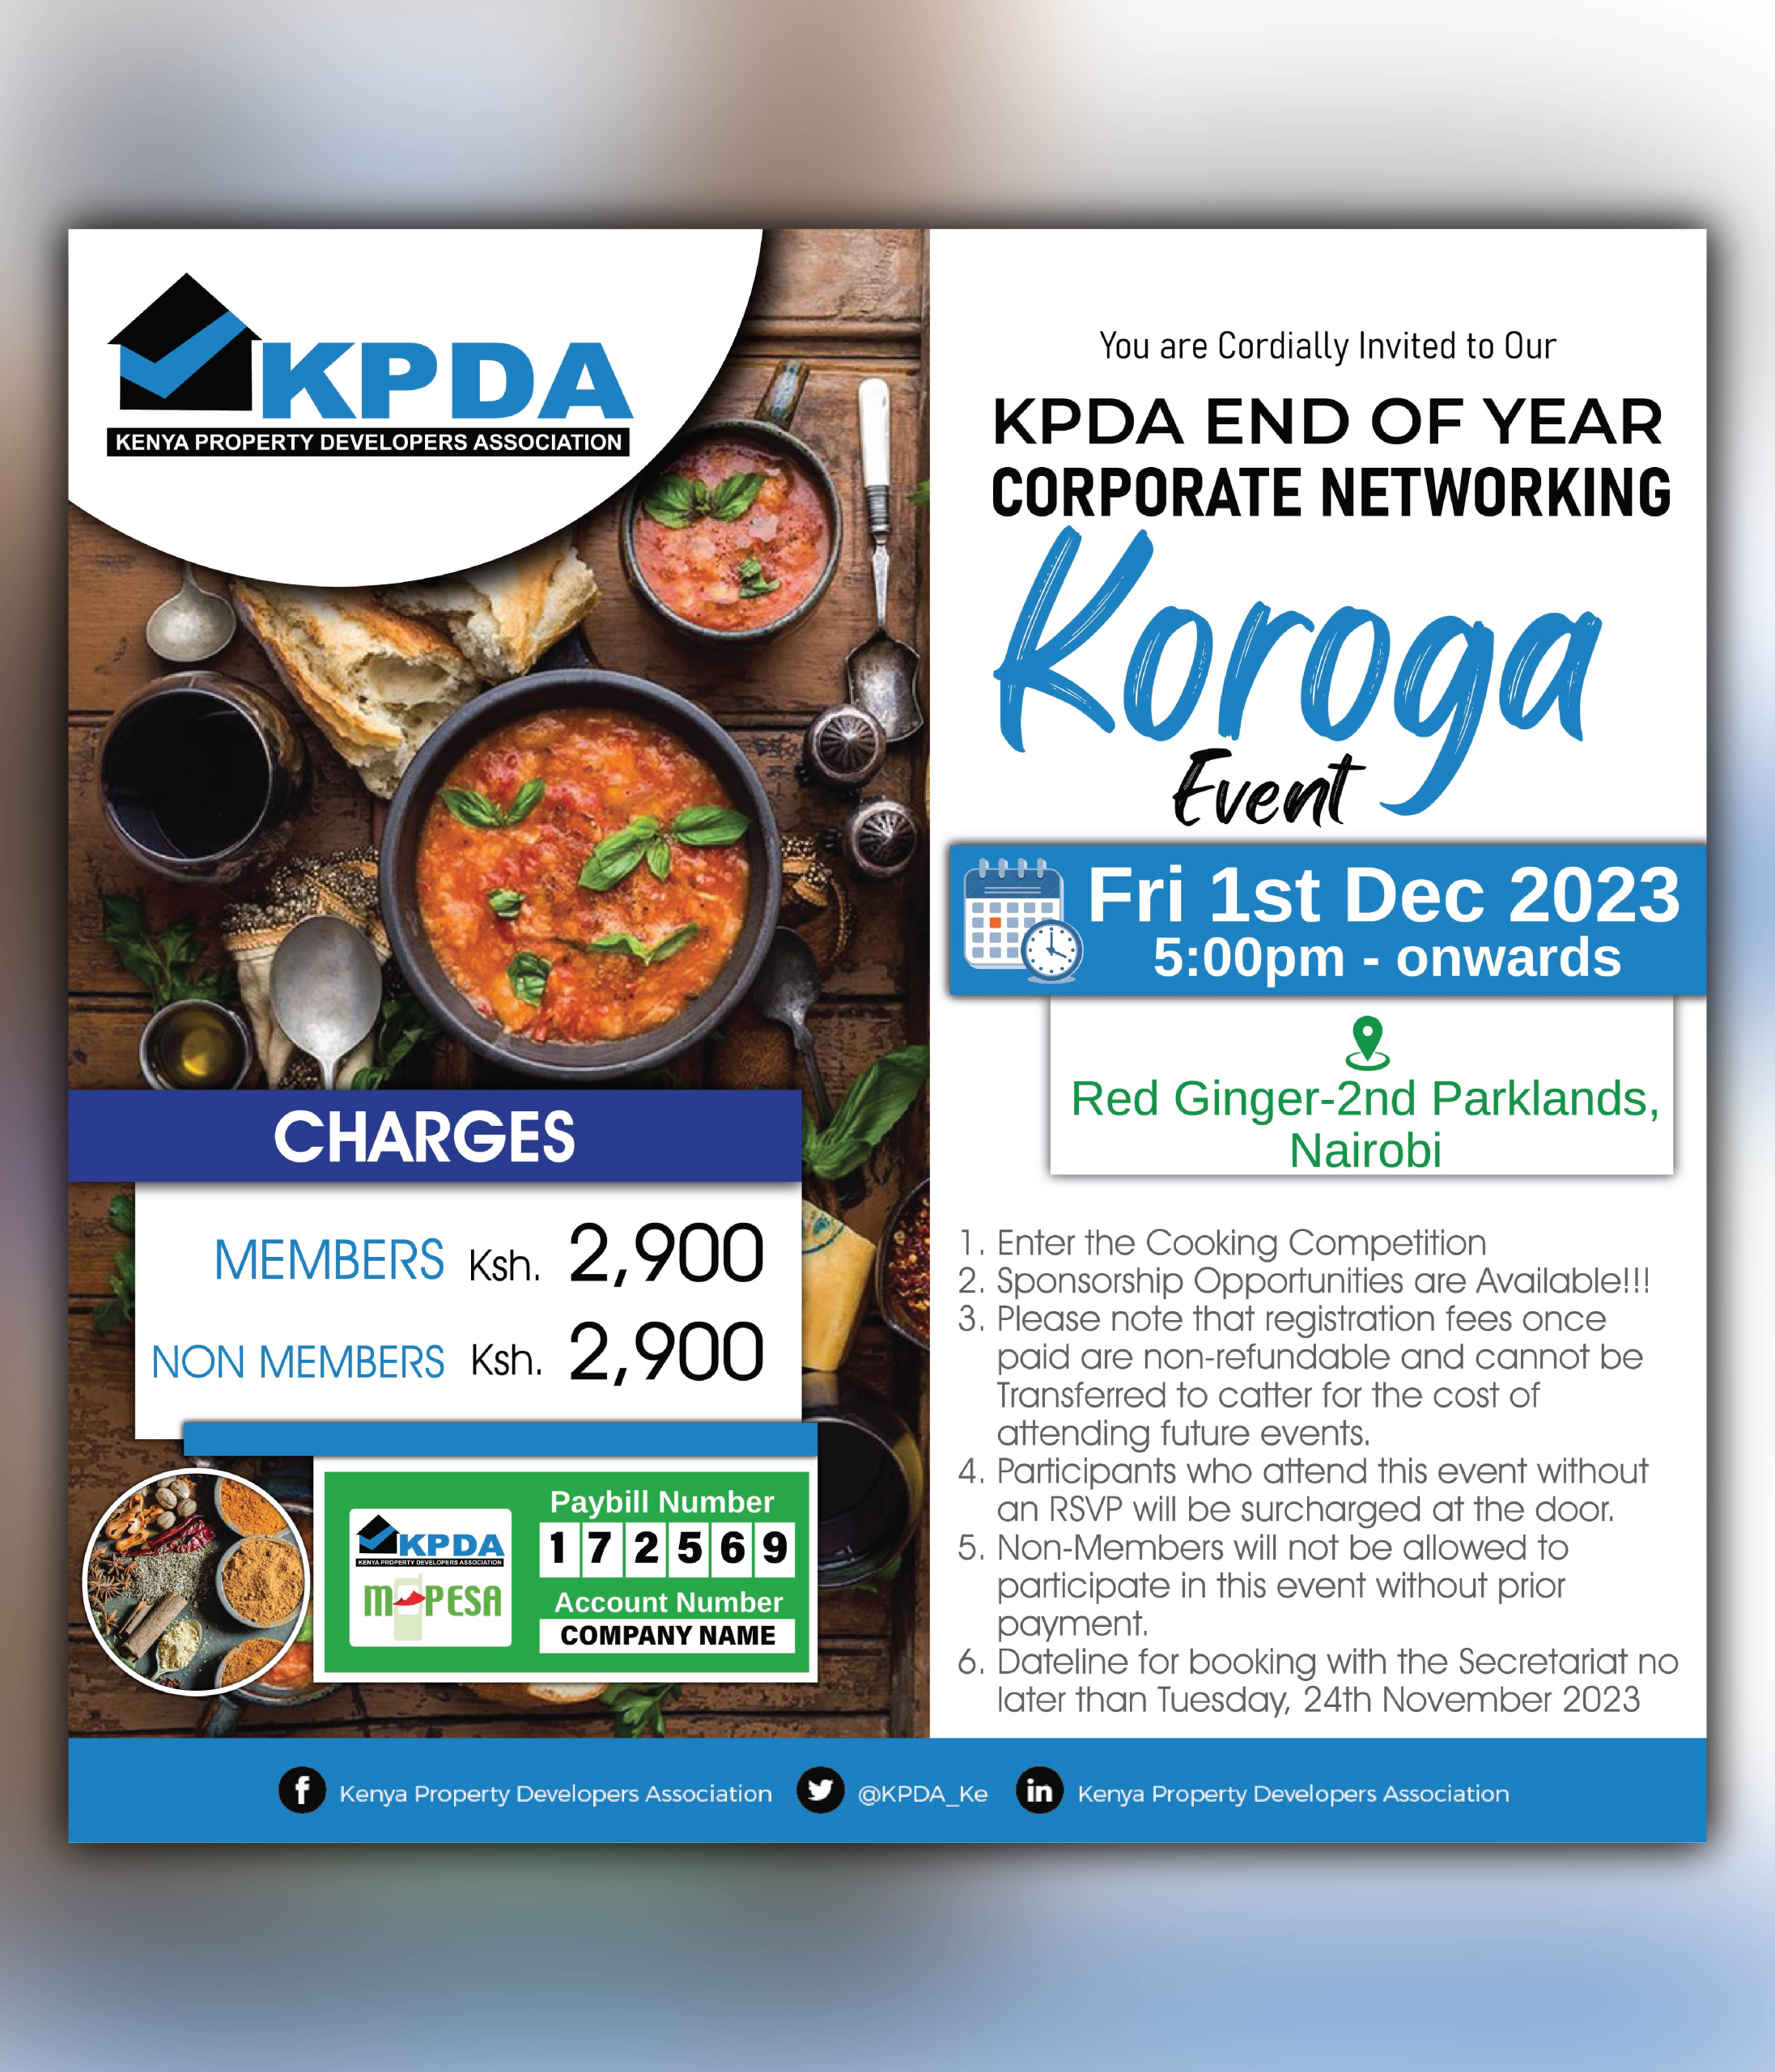 The KPDA End of Year Corporate Networking Koroga Event